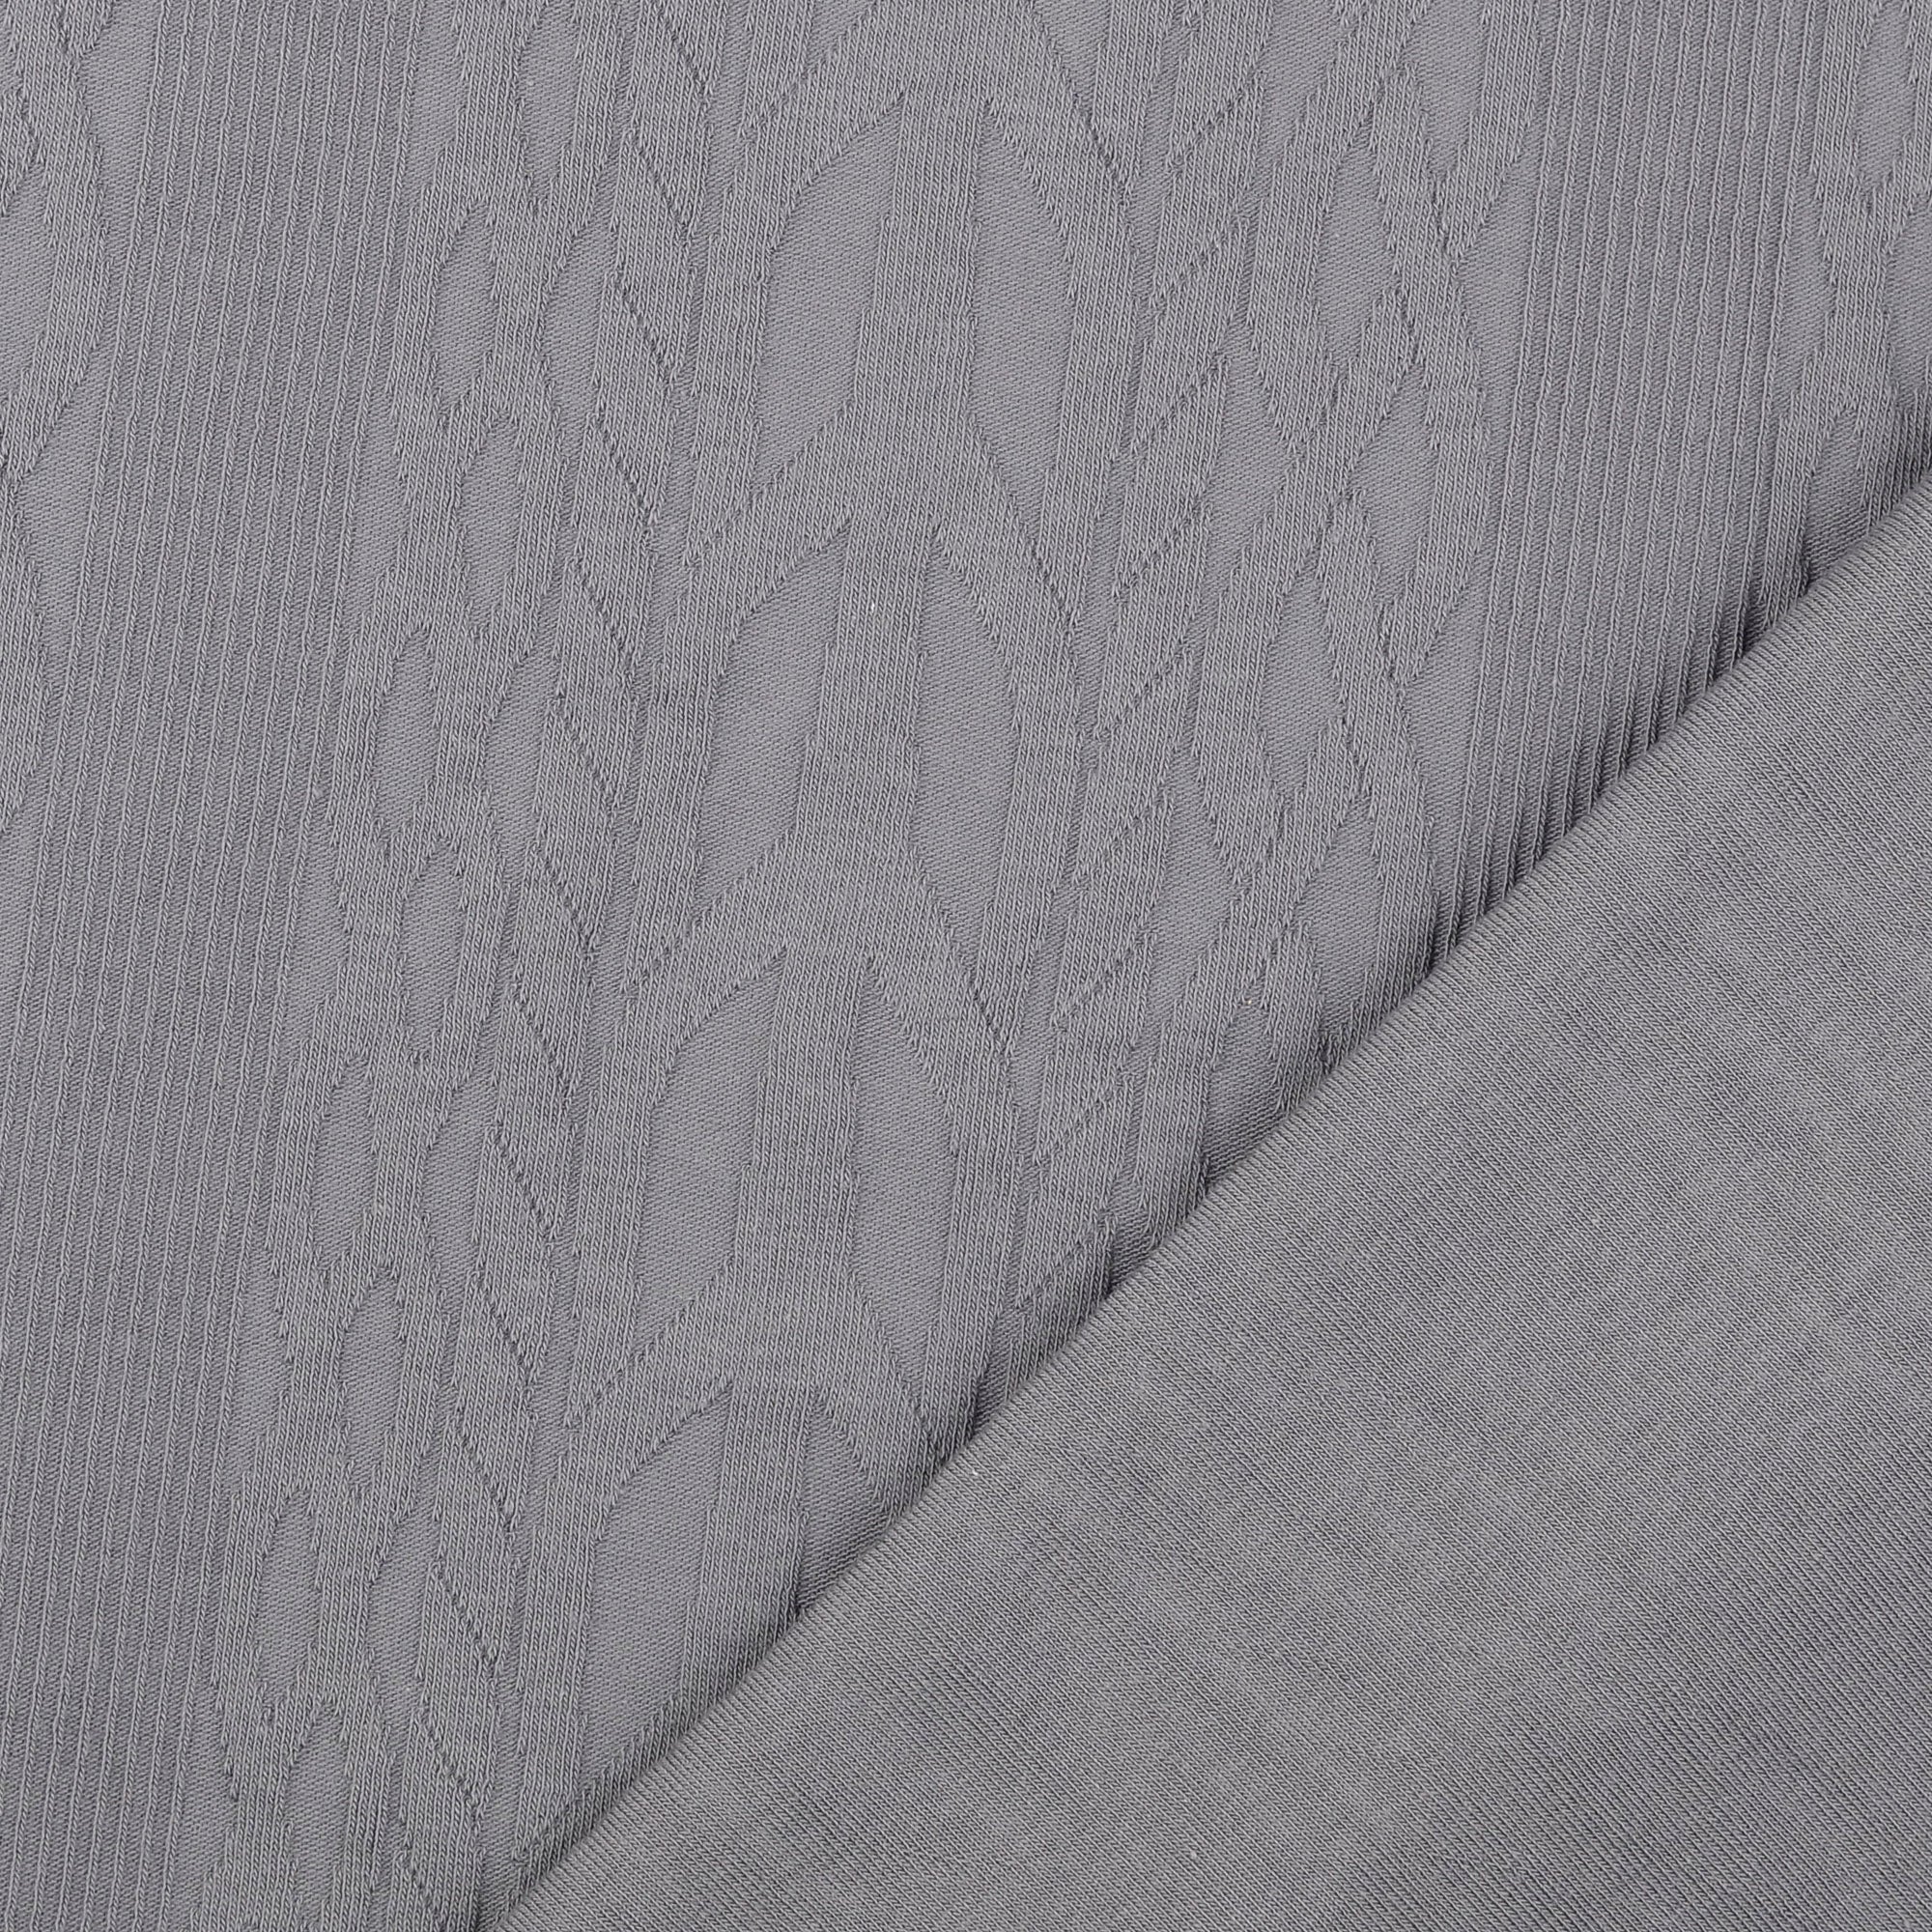 REMNANT 2.33 Metres - Cotton Cable Knit Fabric in Light Grey